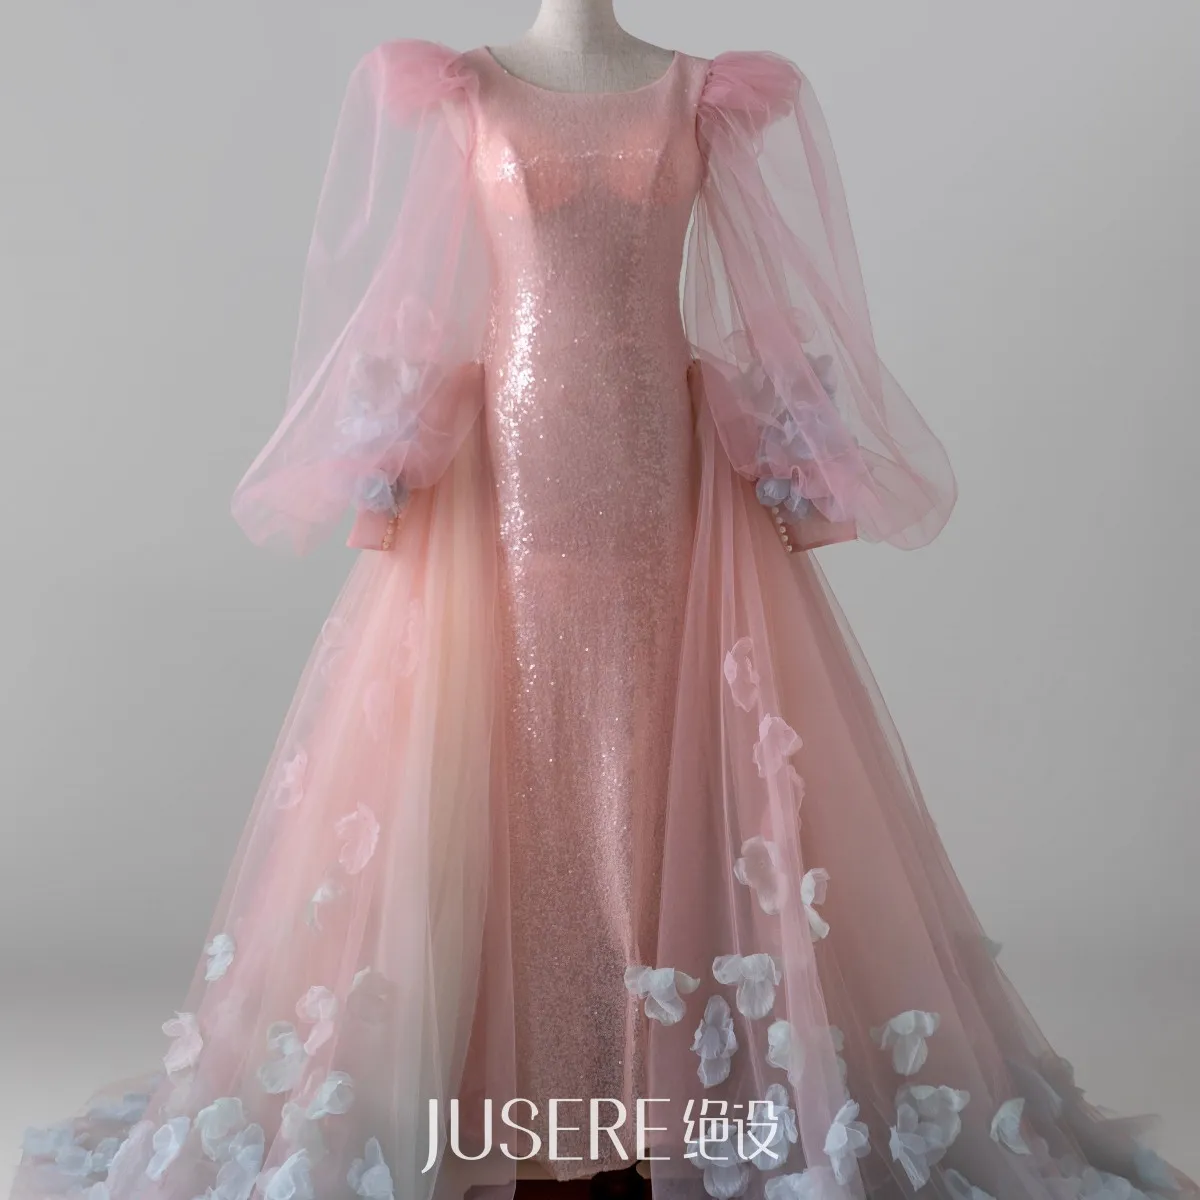 Pink Scoop Neckline Lantern Sleeves Prom Dress Spaghetti Sequins Evening Gowns Modest Tulle 3D Flowers Dress For Women 2022